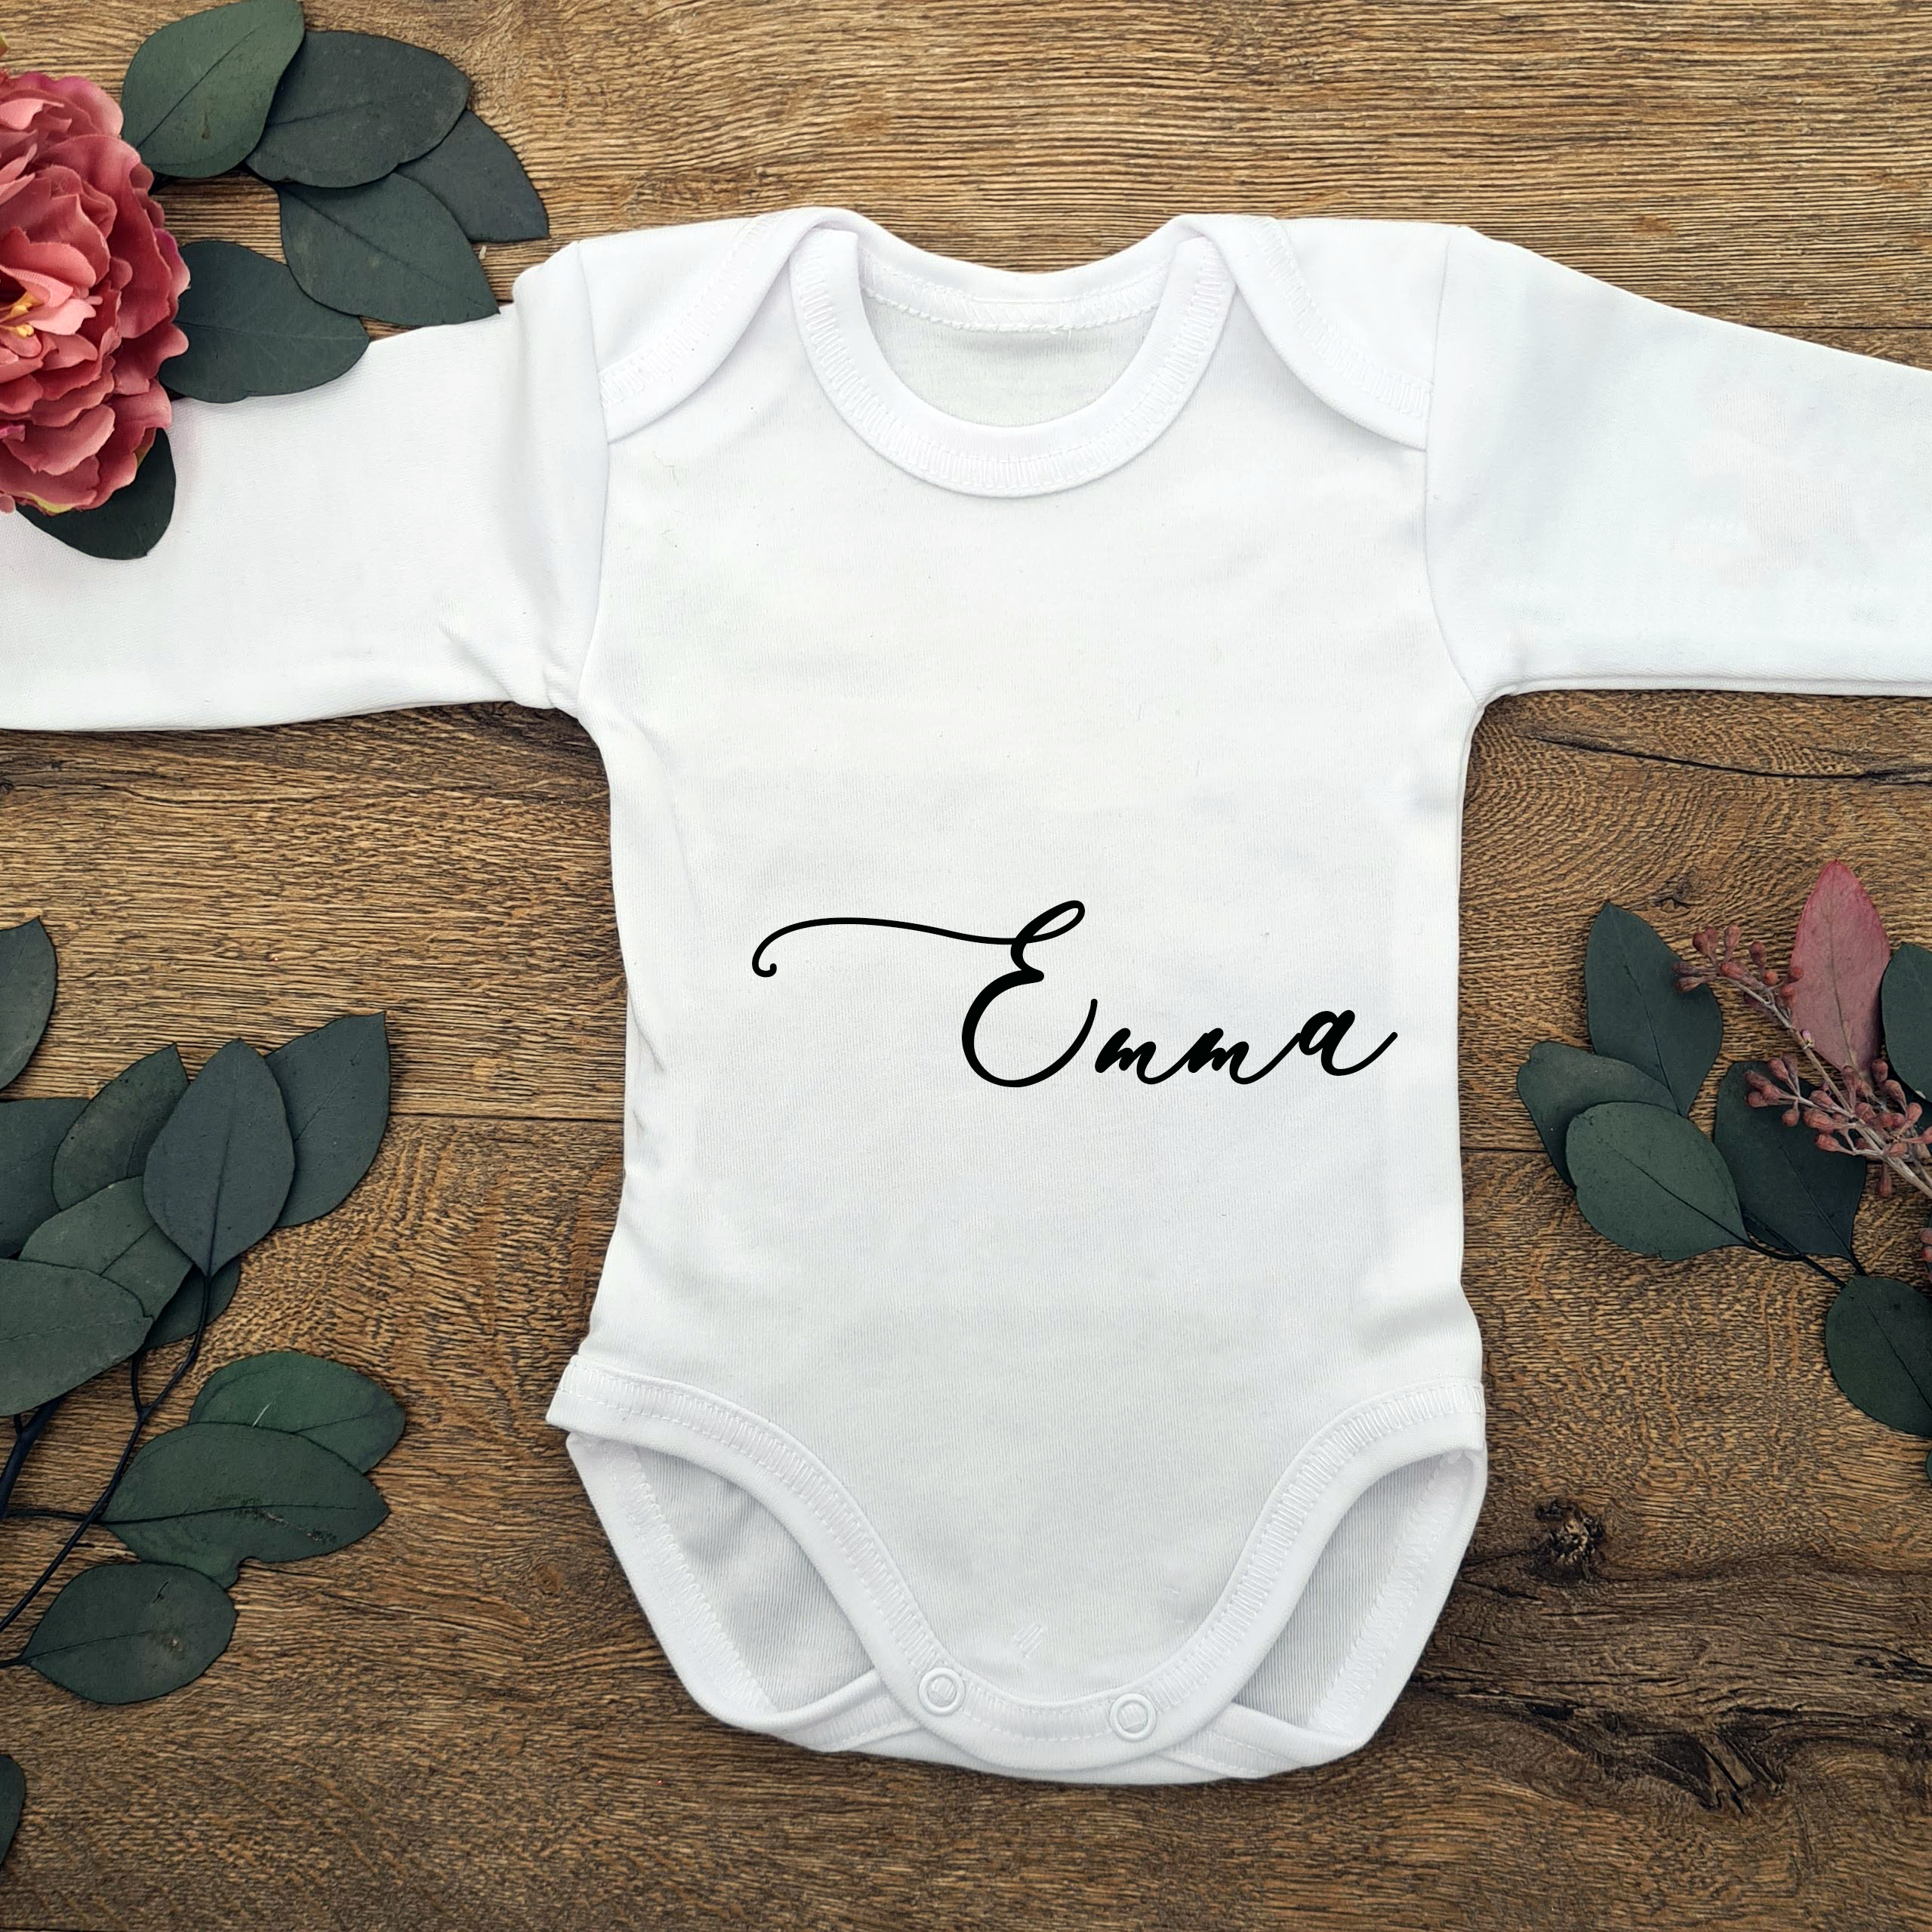 Personalized baby name onesie